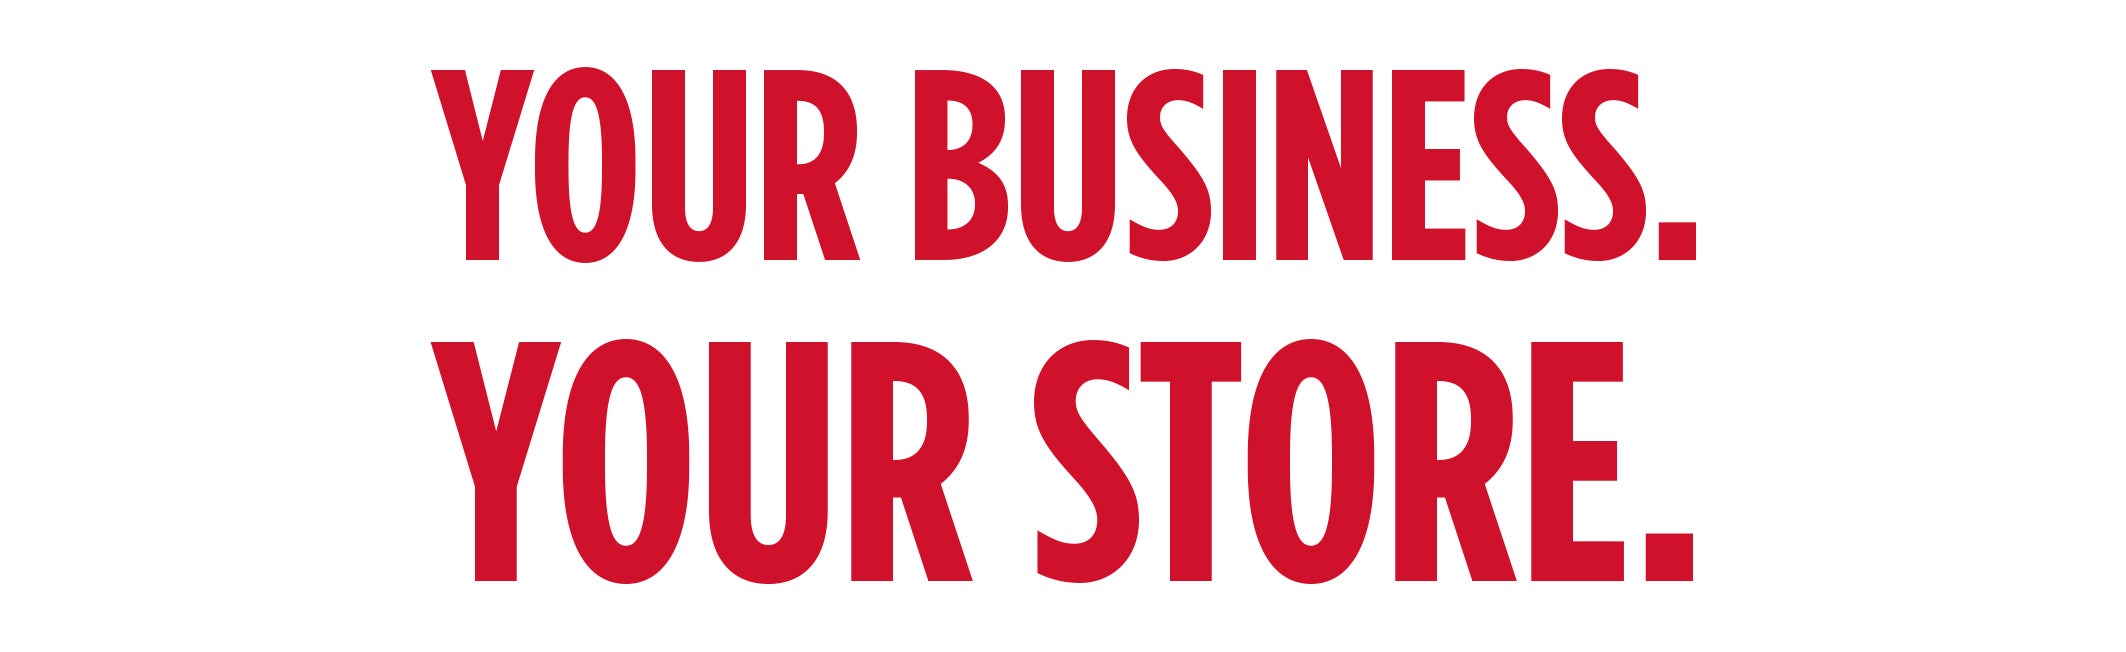 Your Business. Your Store.